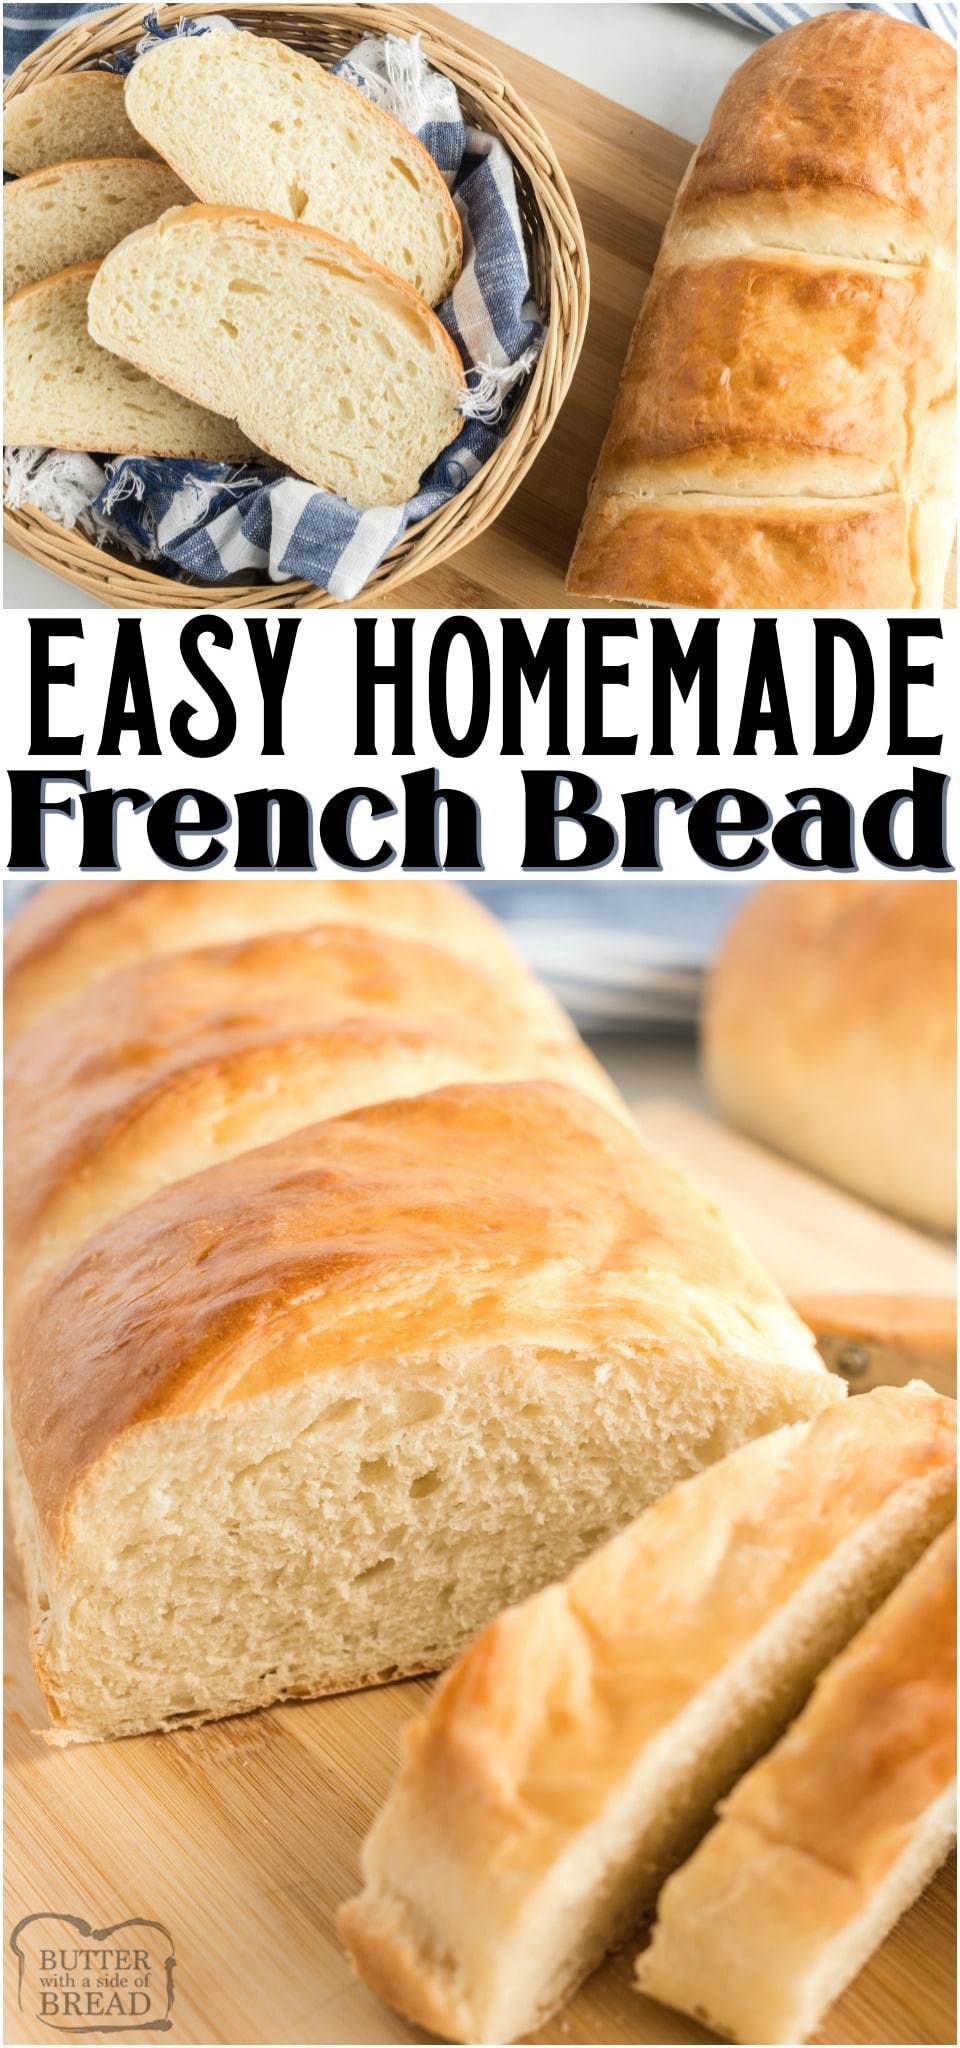 This French Bread recipe is a simple and easy one that will give you two gorgeous loaves of homemade French Bread in under 2 hours! It’s the perfect way to make homemade bread for dinner! #bread #homemade #FrenchBread #breadrecipe #baking #yeast #recipe from BUTTER WITH A SIDE OF BREAD